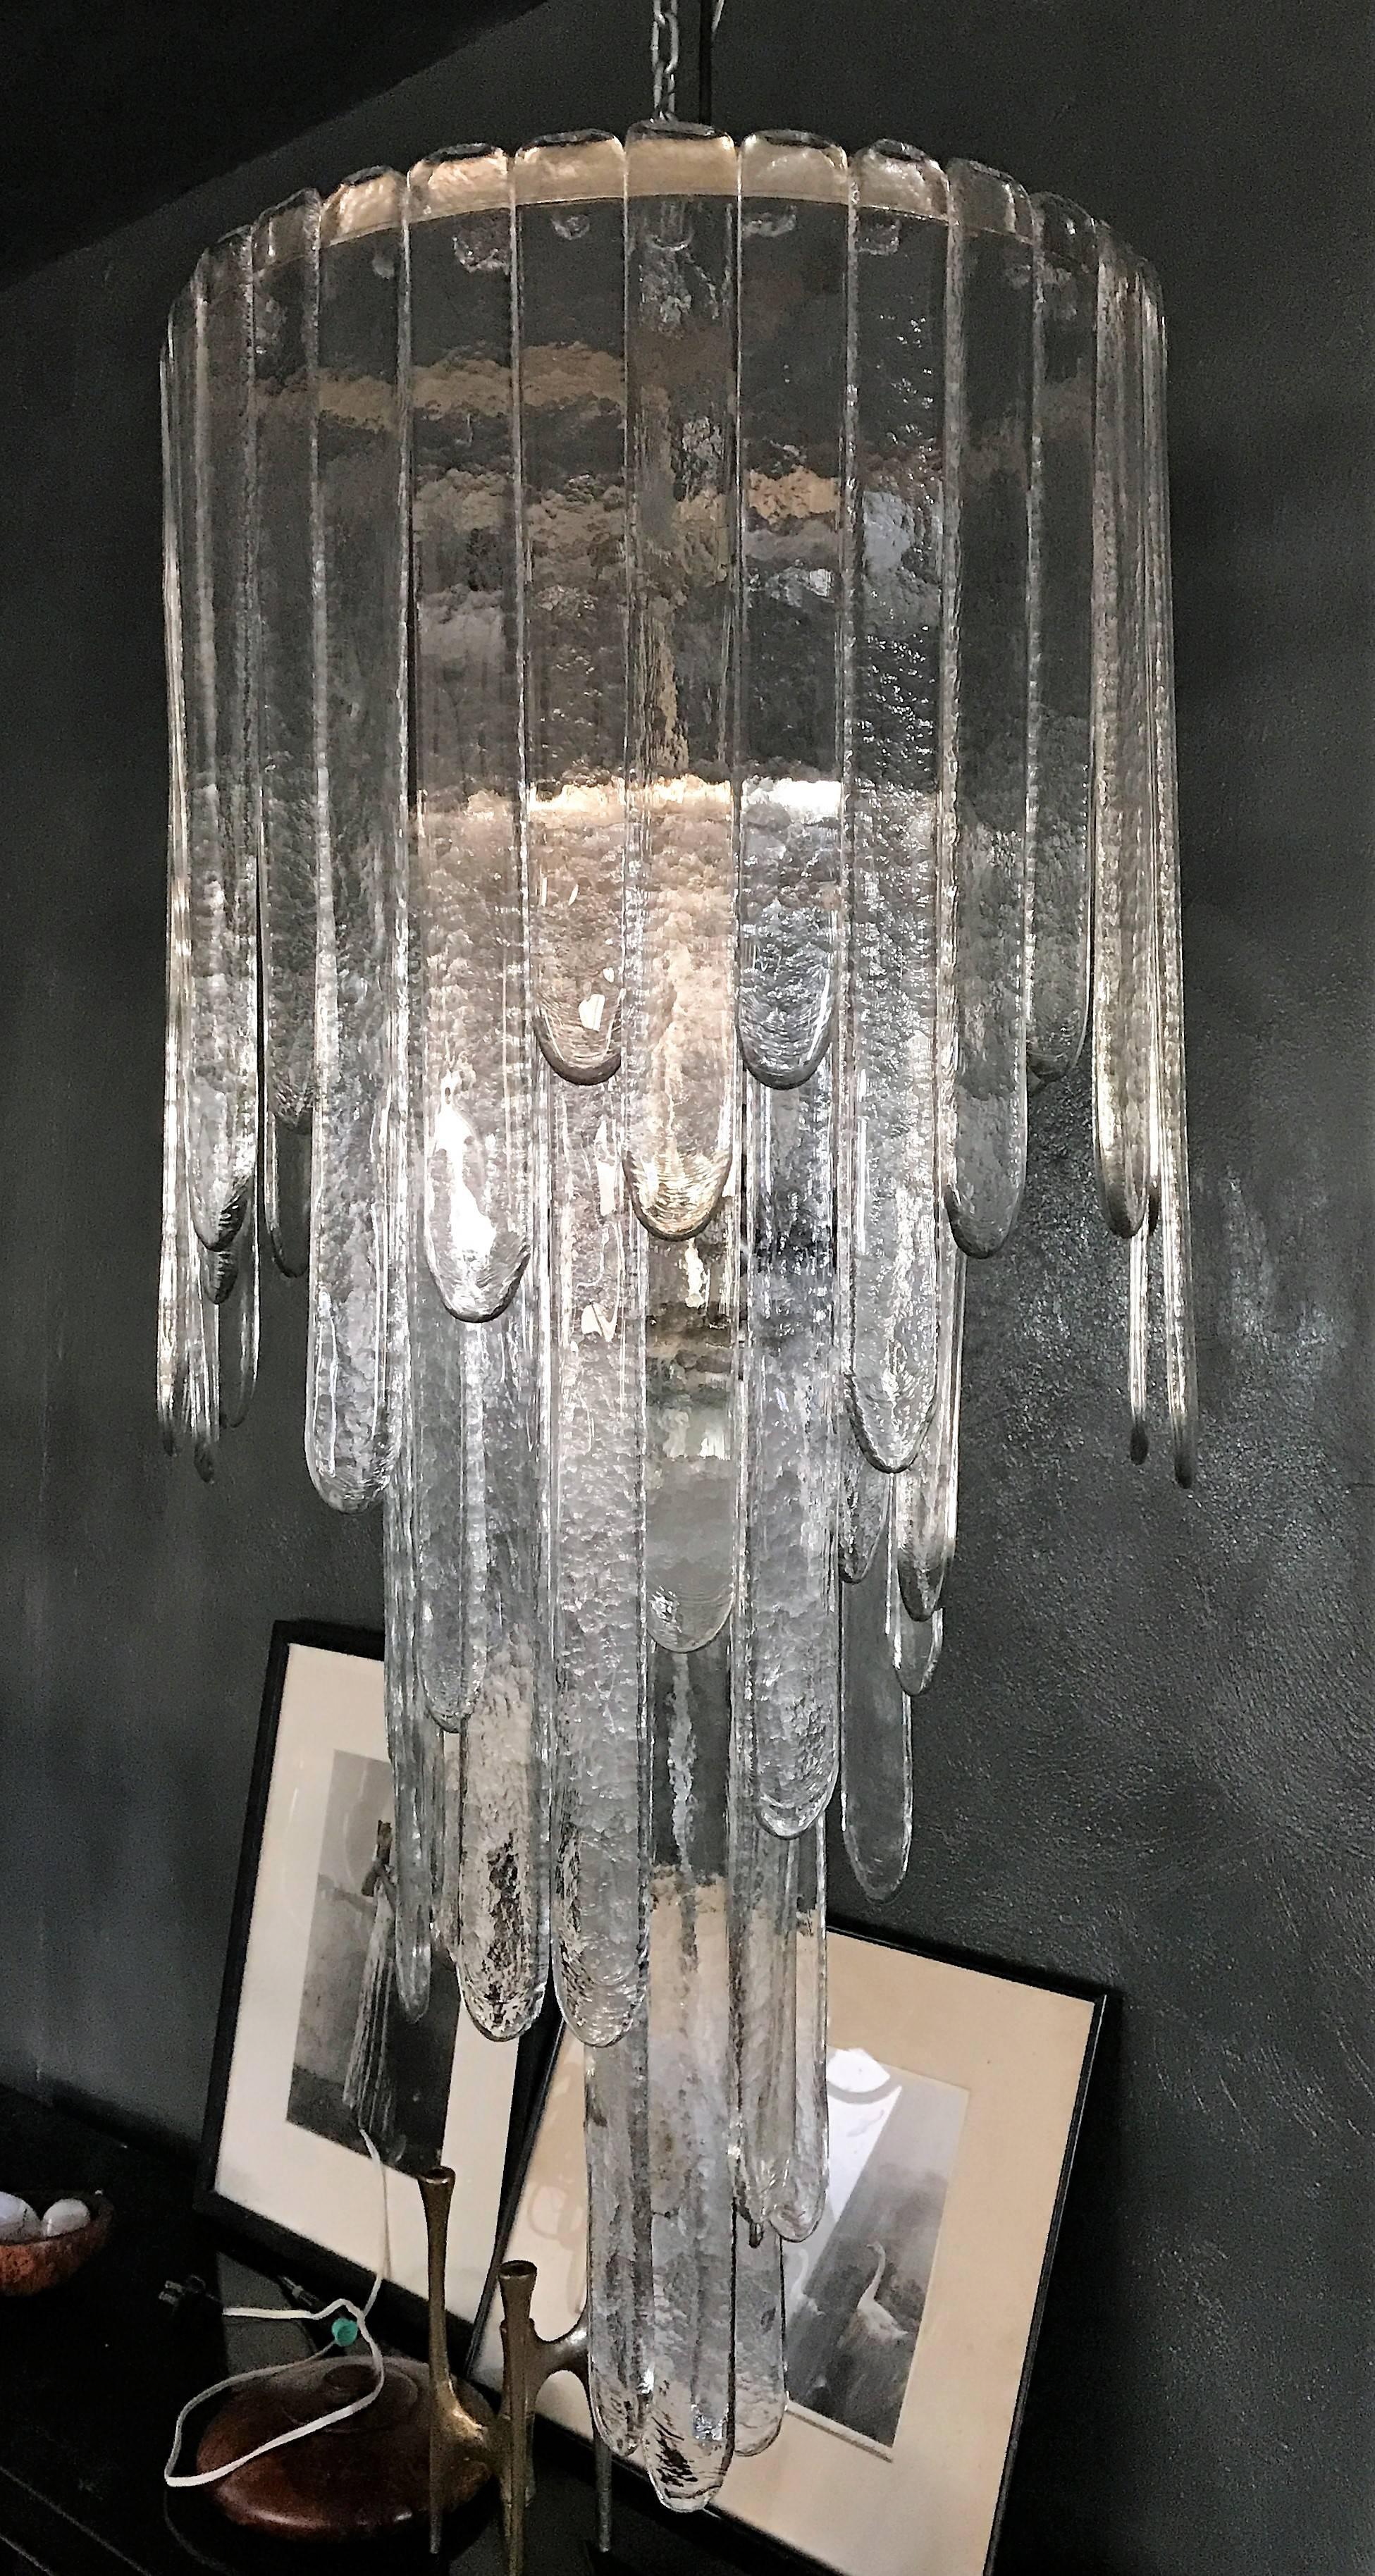 Mid-Century Modern chandelier by Carlo Nason for Mazzega consisting of three stages of clear glass blades. This chandelier is complete as there is not one inch of space free where the blades hang from. It measures 114 cm tall in its current